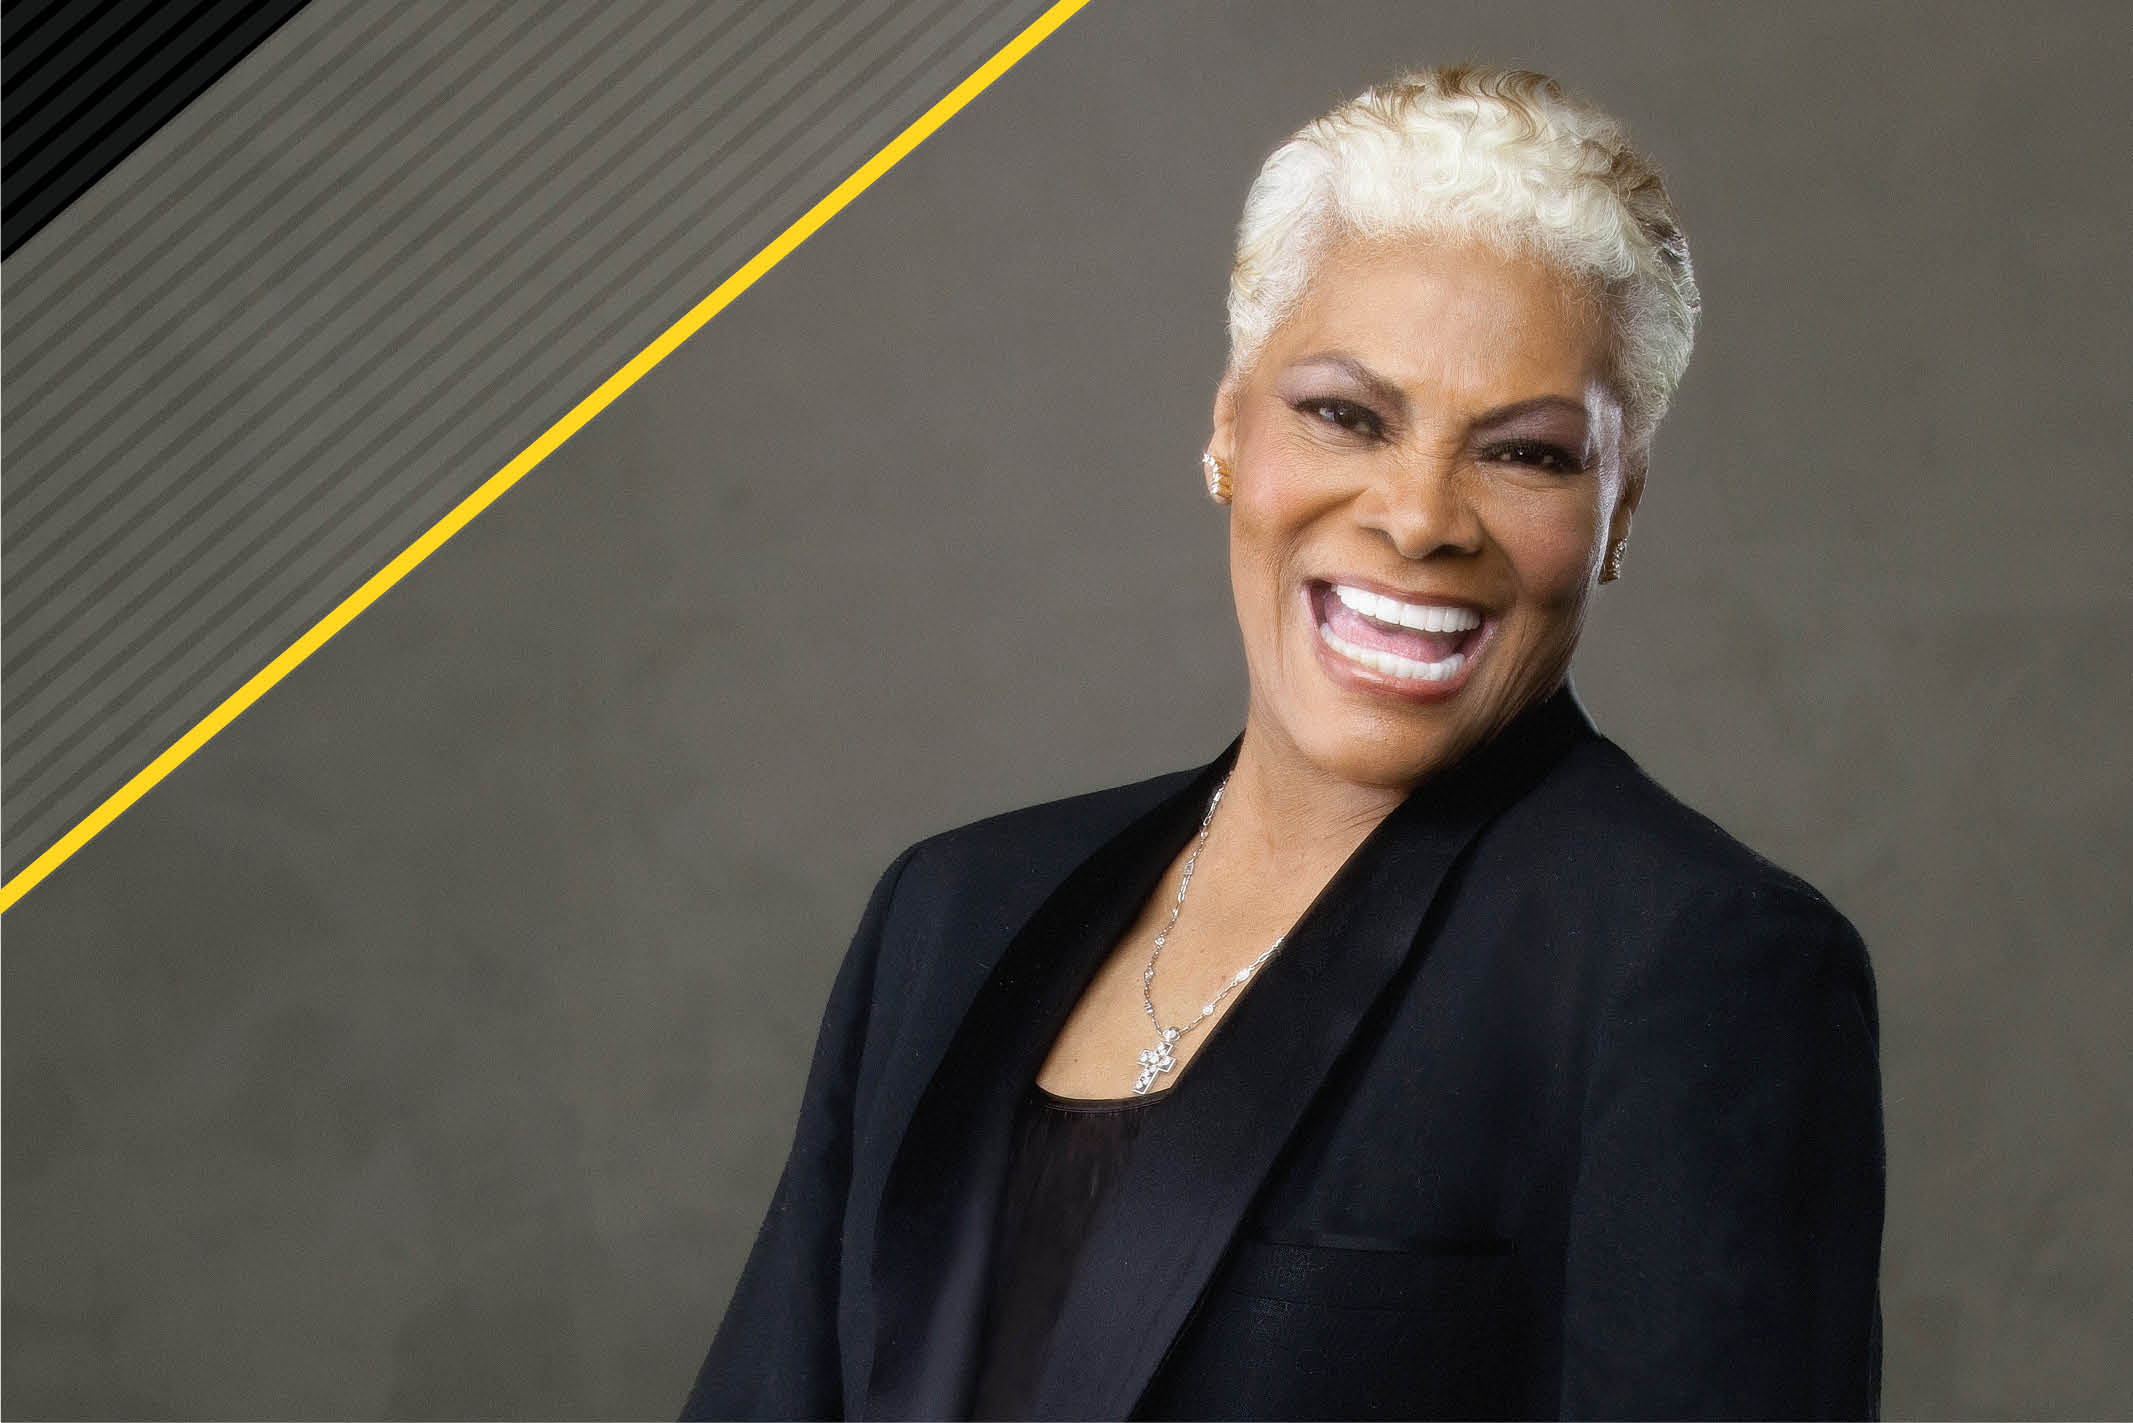 A Black woman with white hair smiles against a gray background with event name, date, and time.